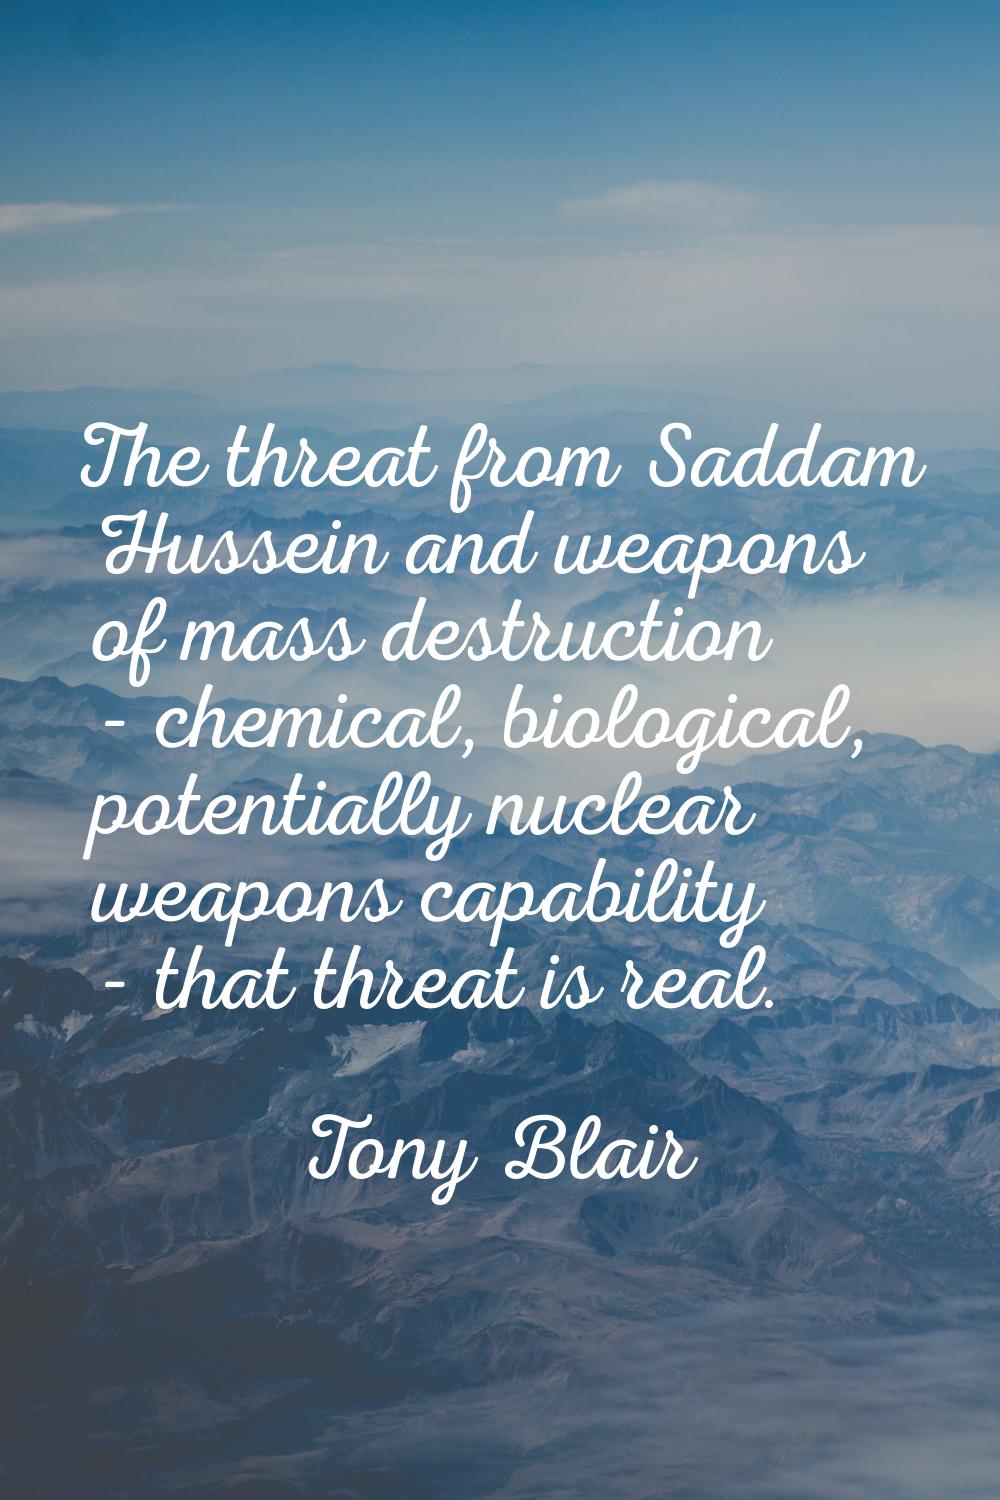 The threat from Saddam Hussein and weapons of mass destruction - chemical, biological, potentially 